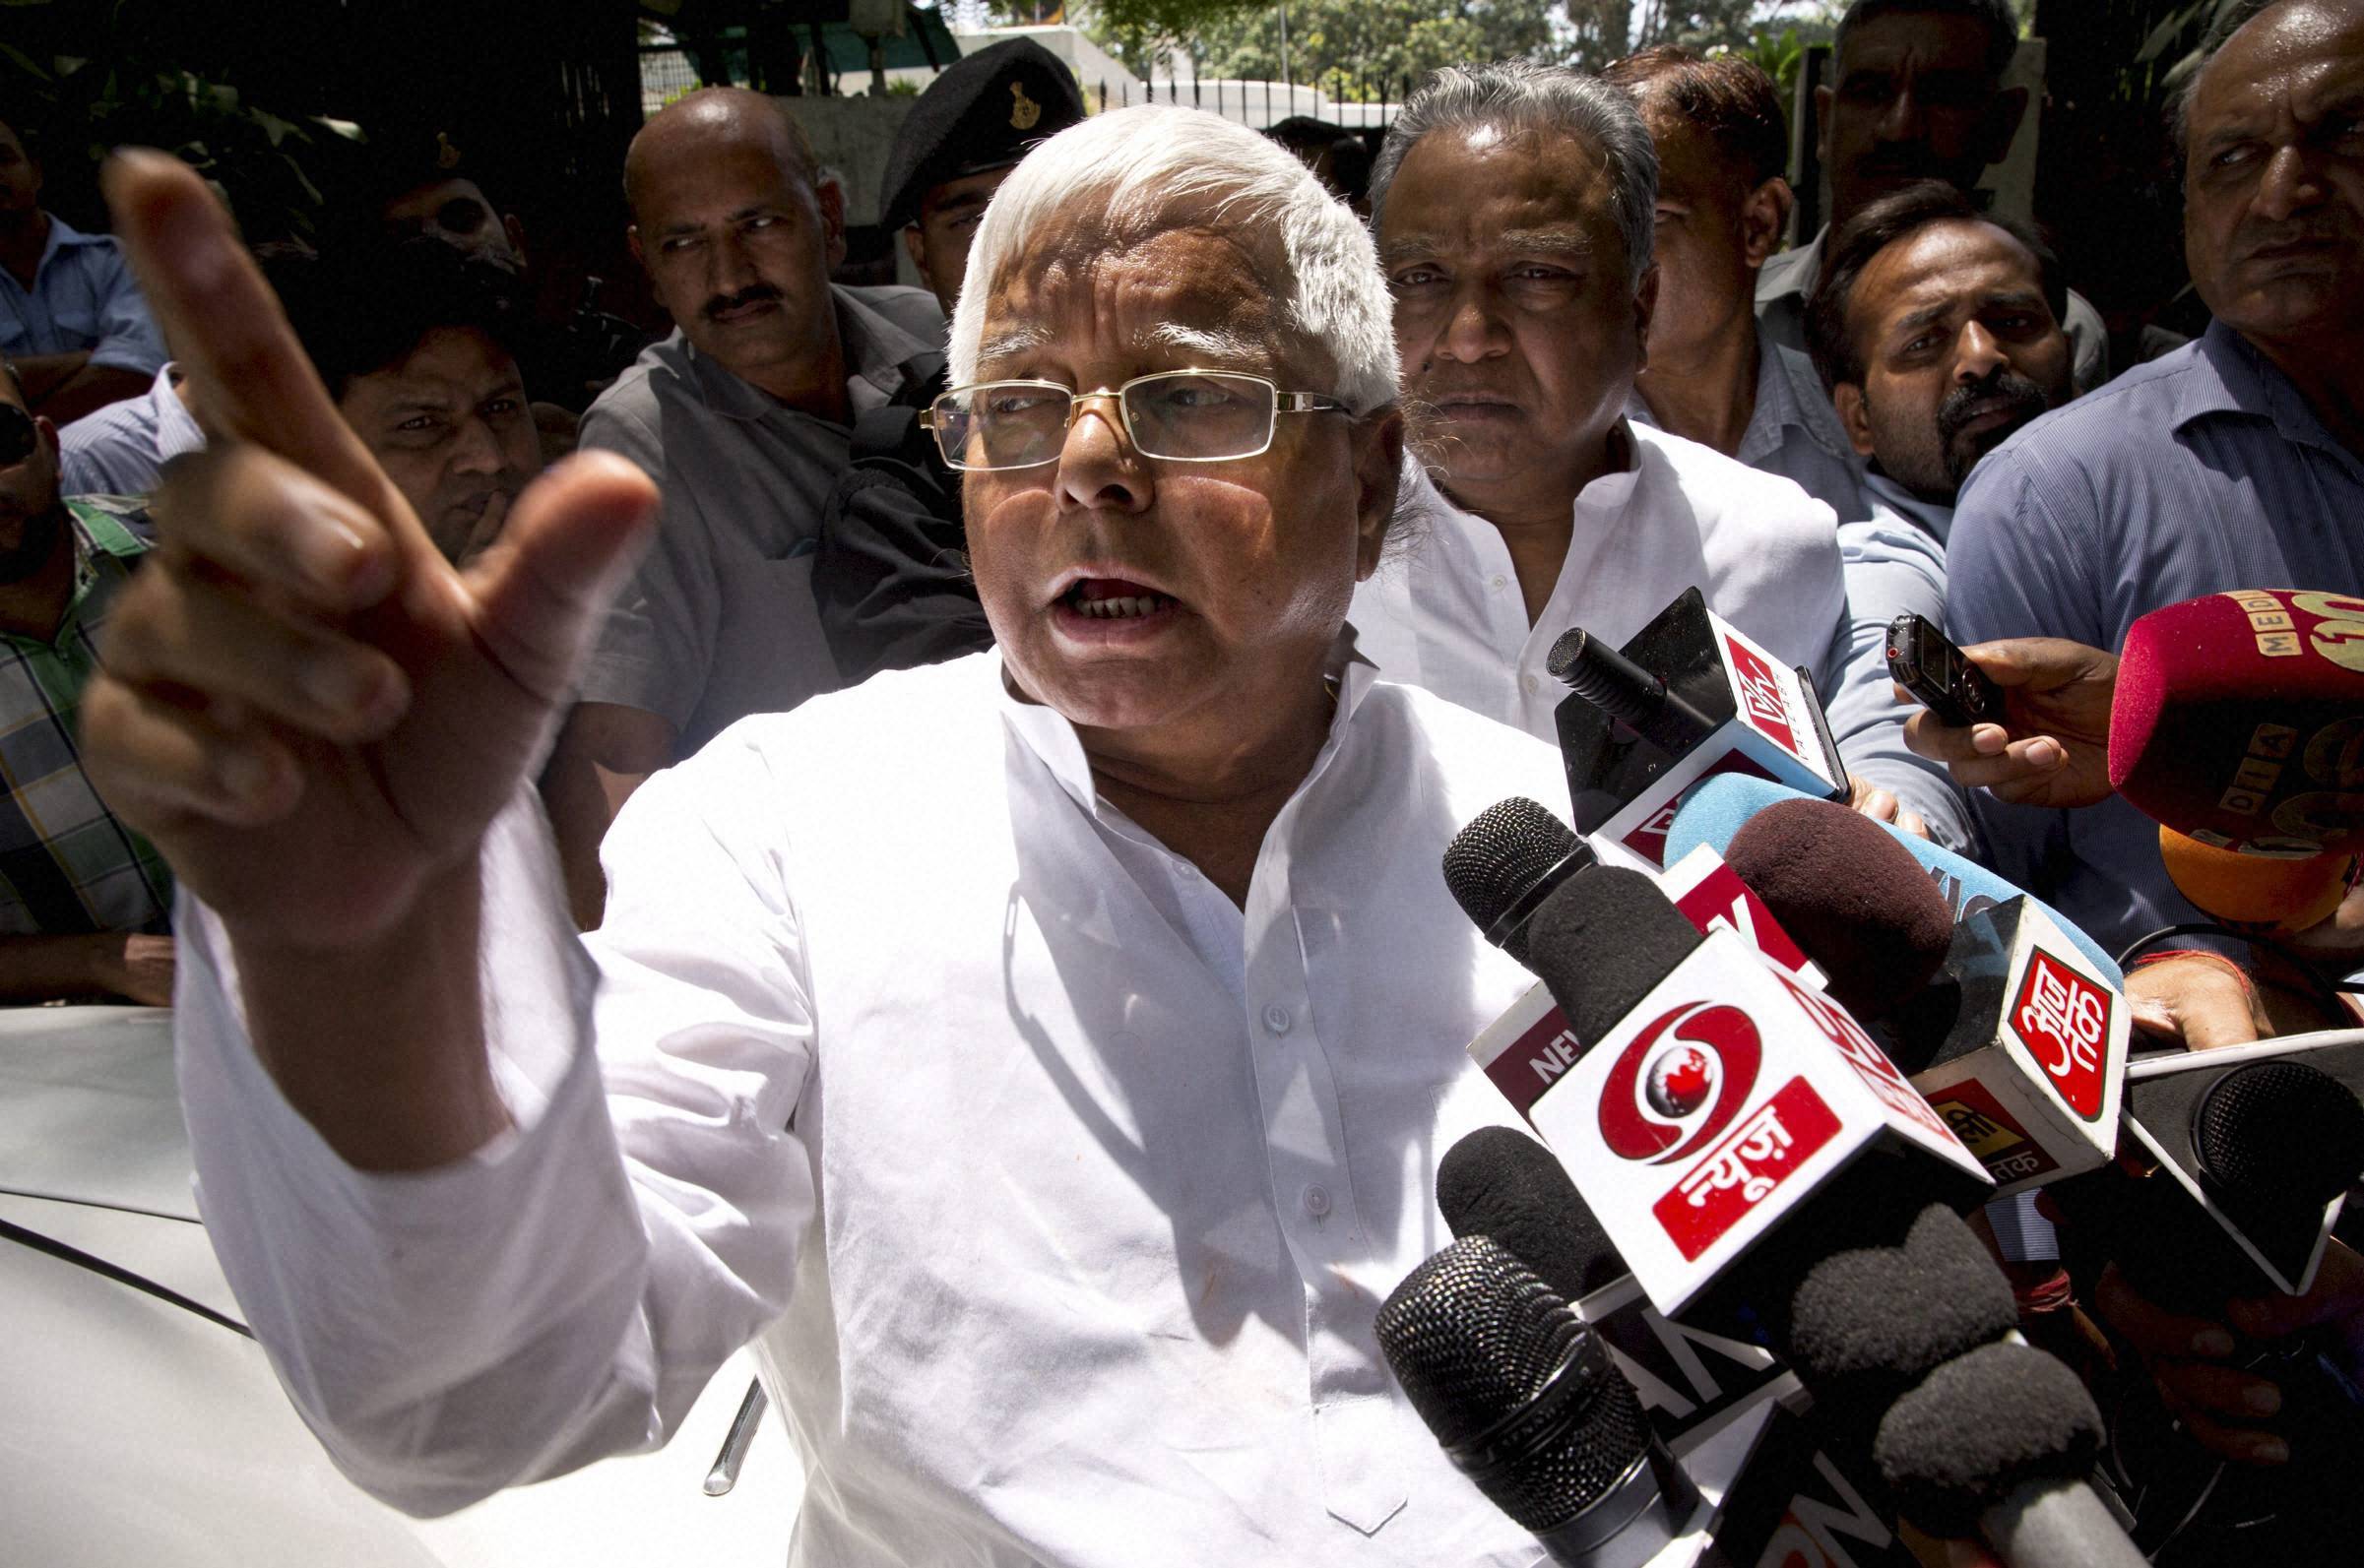 New Delhi: Rashtriya Janata Dal (RJD) leader Lalu Prasad Yadav speaks to reporters after a meeting with Samajwadi Party (SP) leader Mulayam Singh Yadav in New Delhi on Friday. The leaders reportedly met to sort out seat sharing issues ahead of the Bihar state elections, expected later this year. PTI Photo (PTI5_22_2015_000098B)